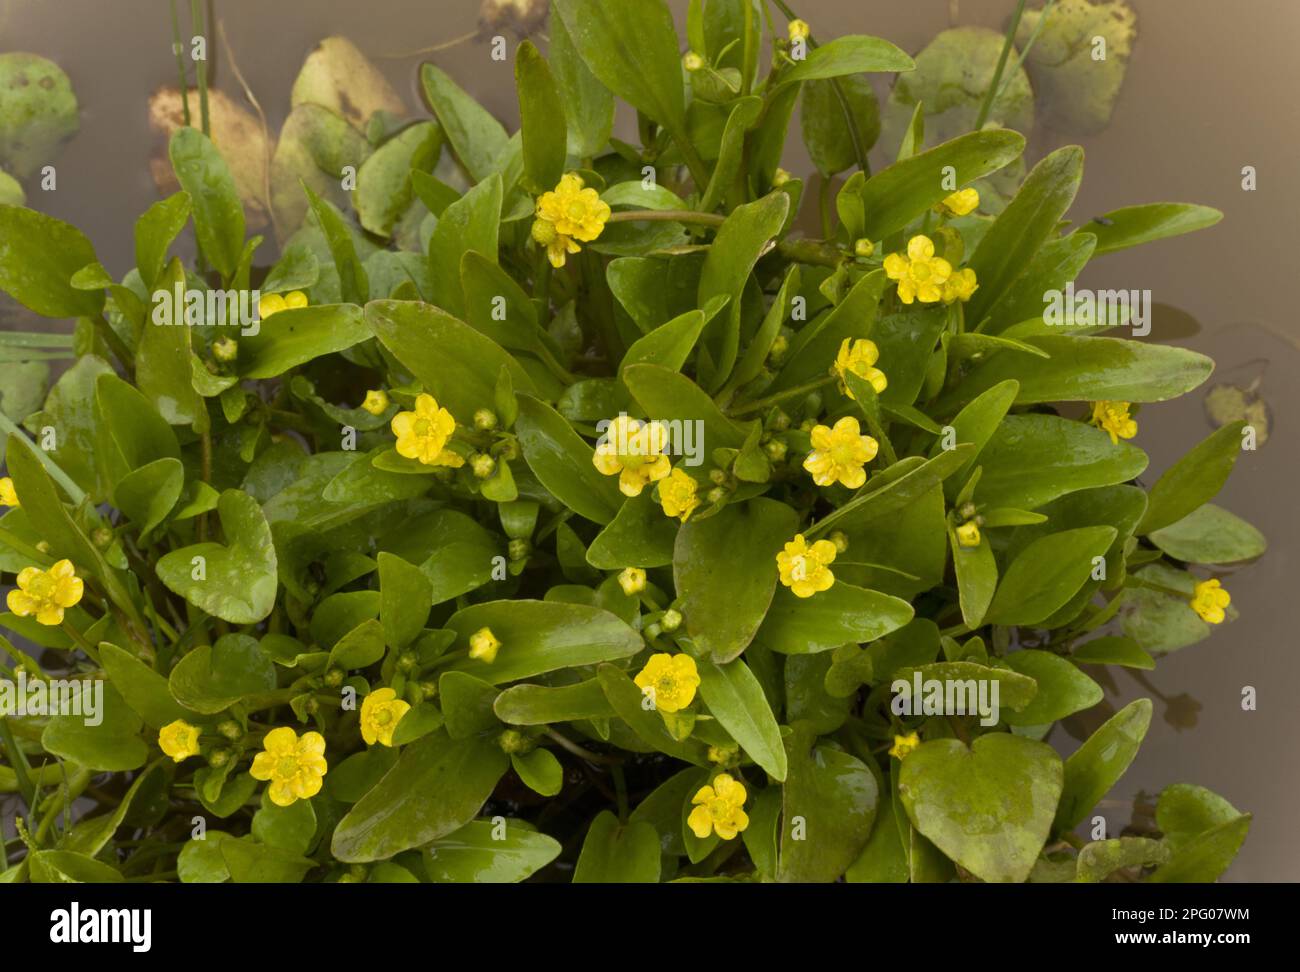 Adder's tongue spearwort (Ranunculus ophioglossifolius) flowers, grows in standing water, Sardinia, Italy Stock Photo